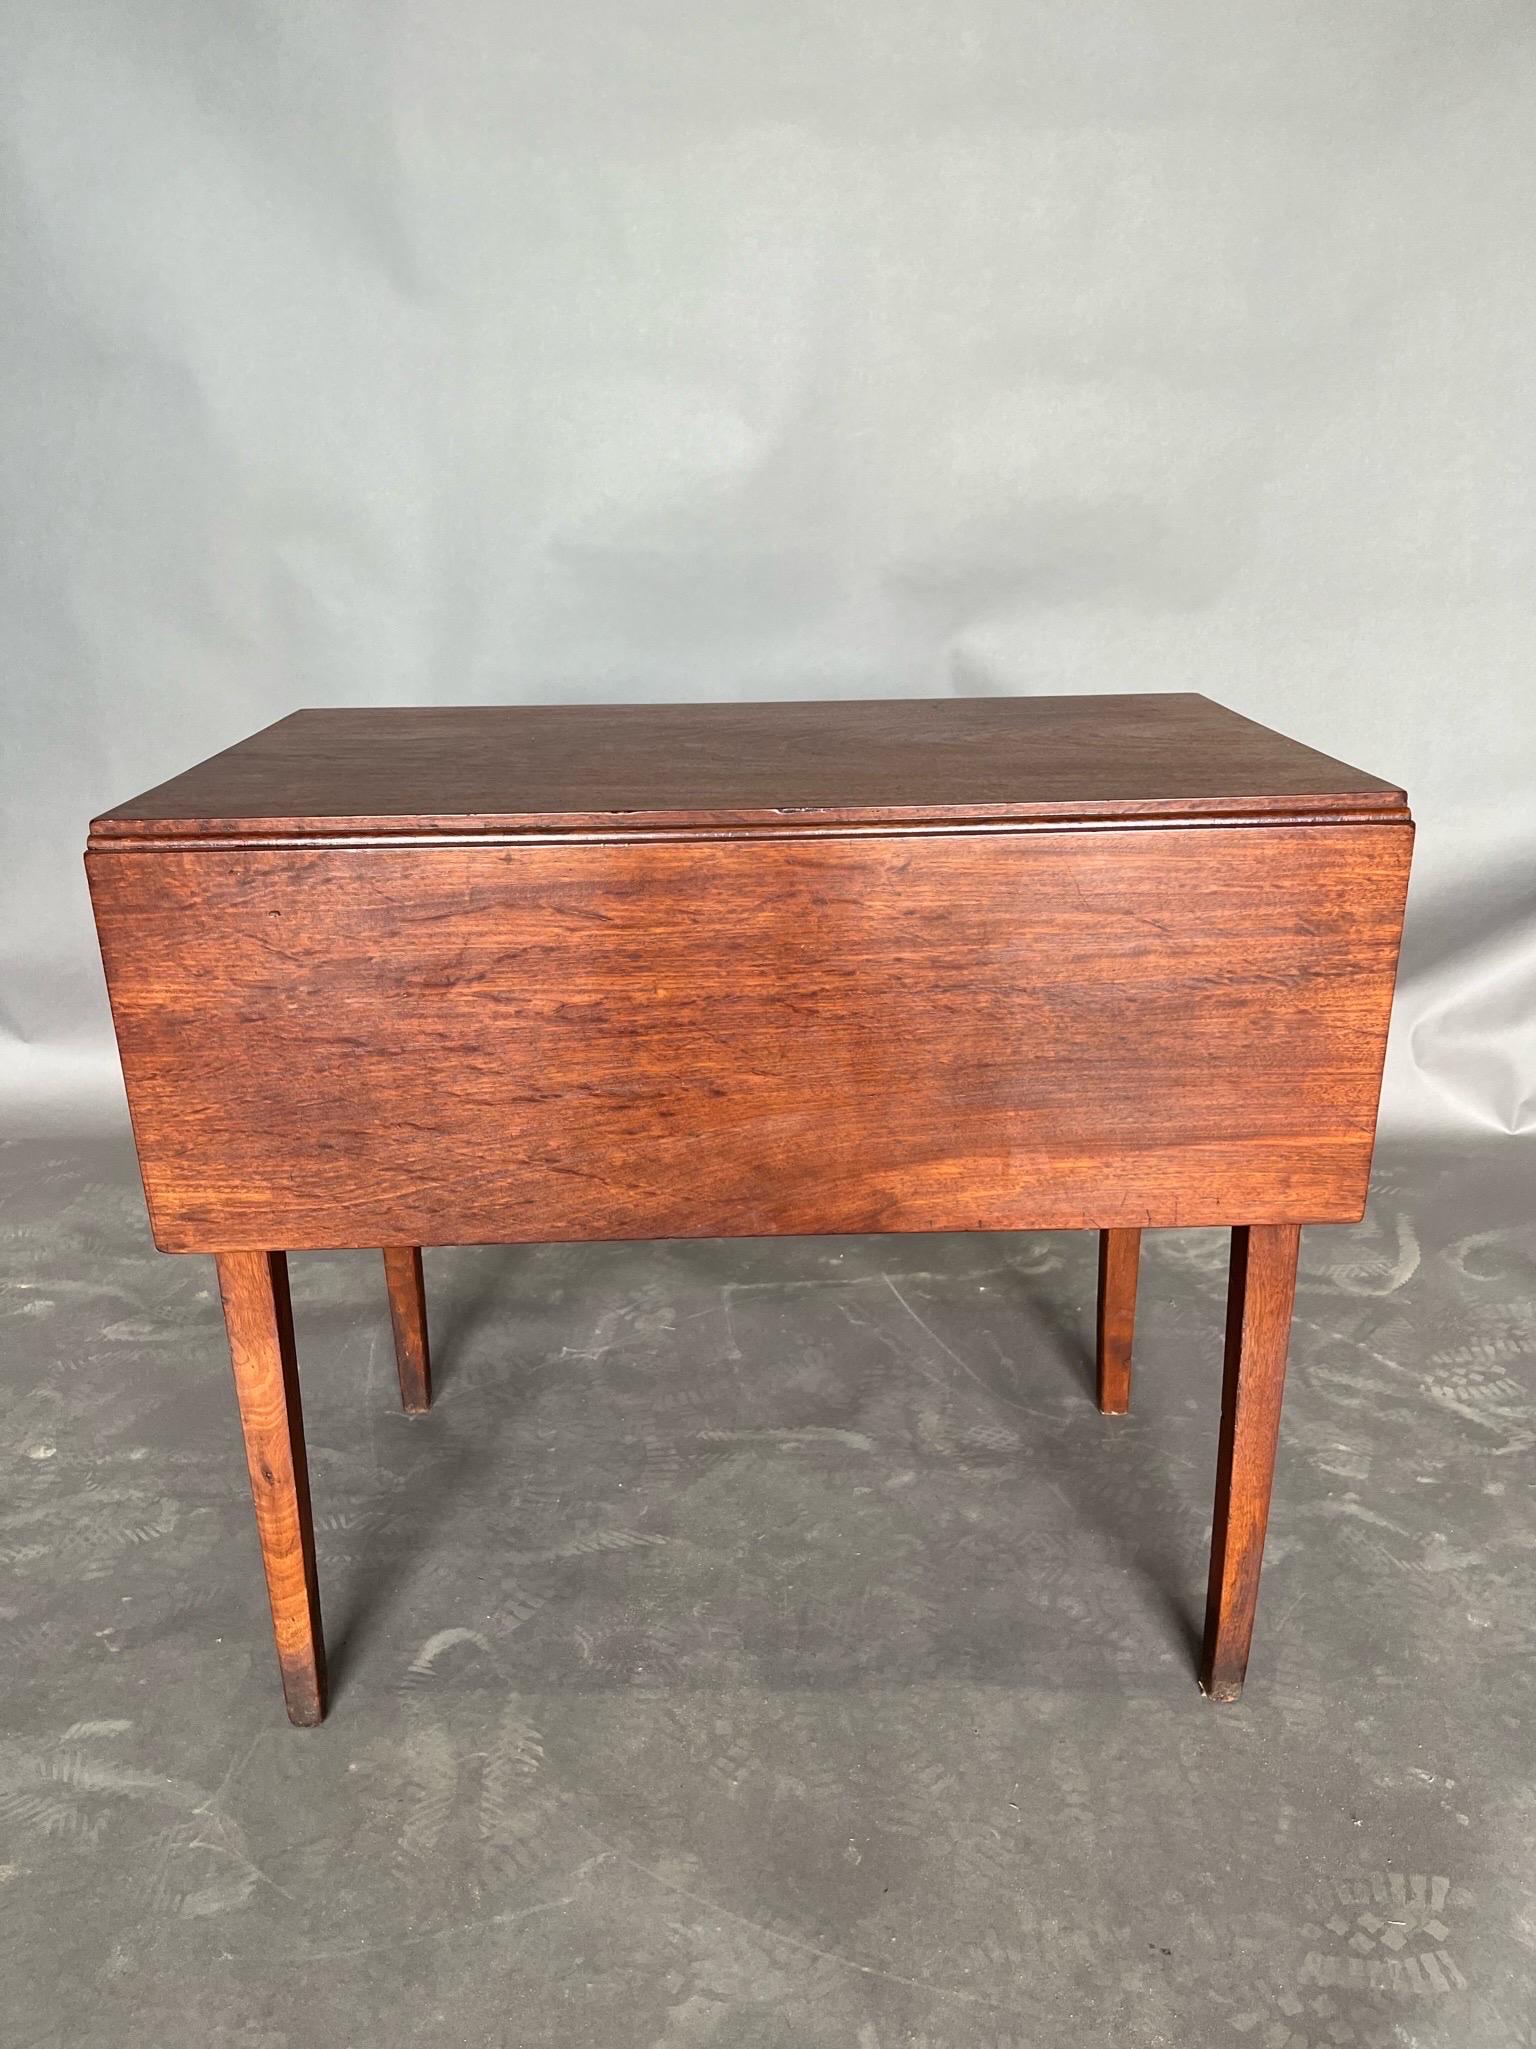 18th Century Virginia Tidewater Walnut and Yellow Pine Drop Leaf Table  For Sale 4